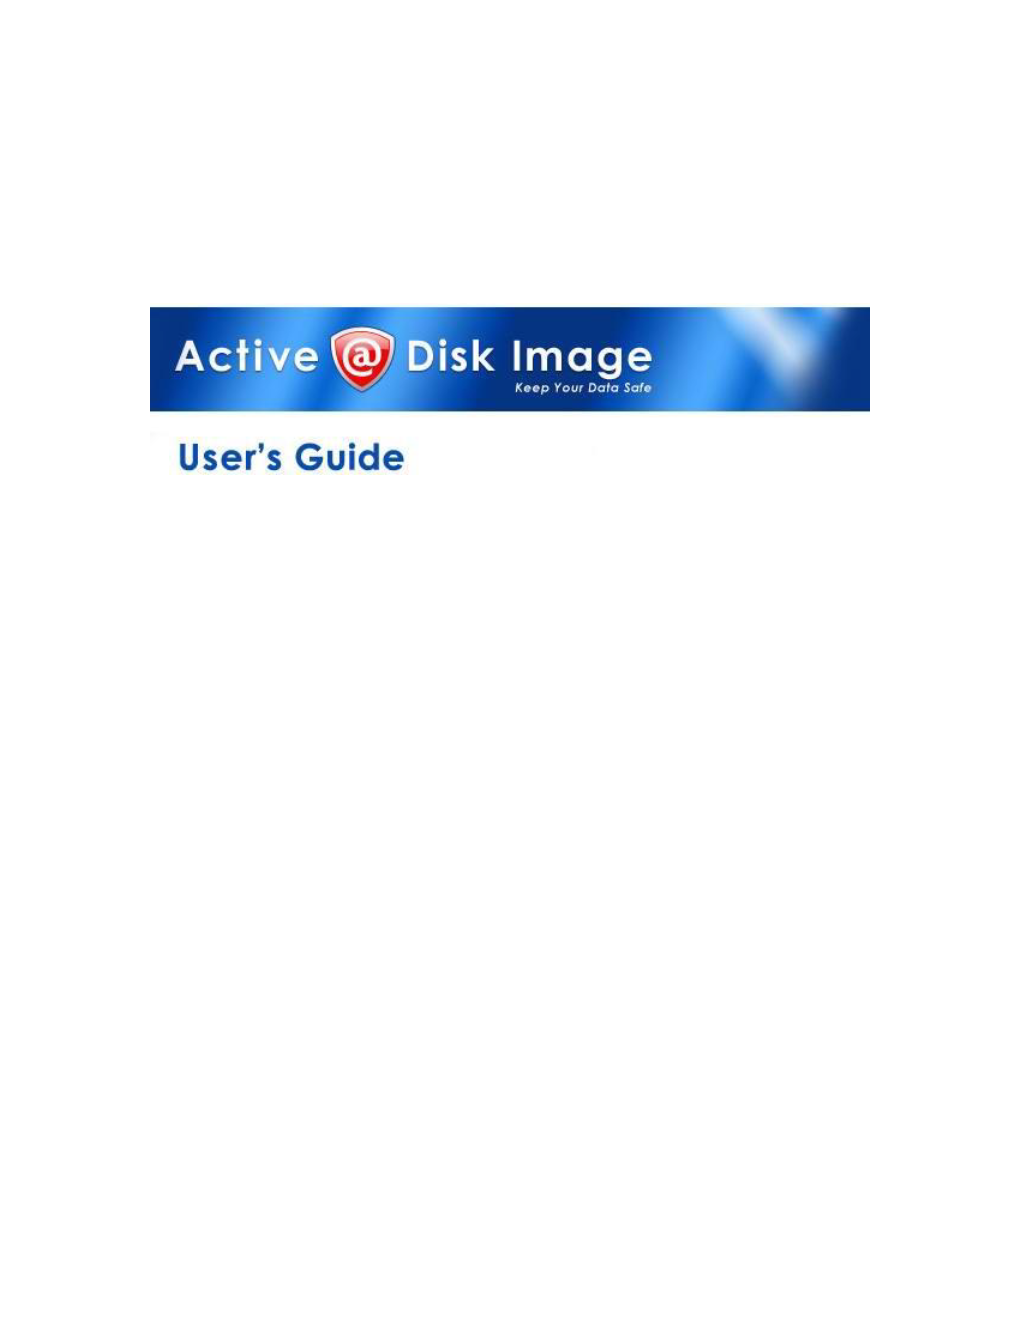 Disk Image Active@ Disk Image User's Guide